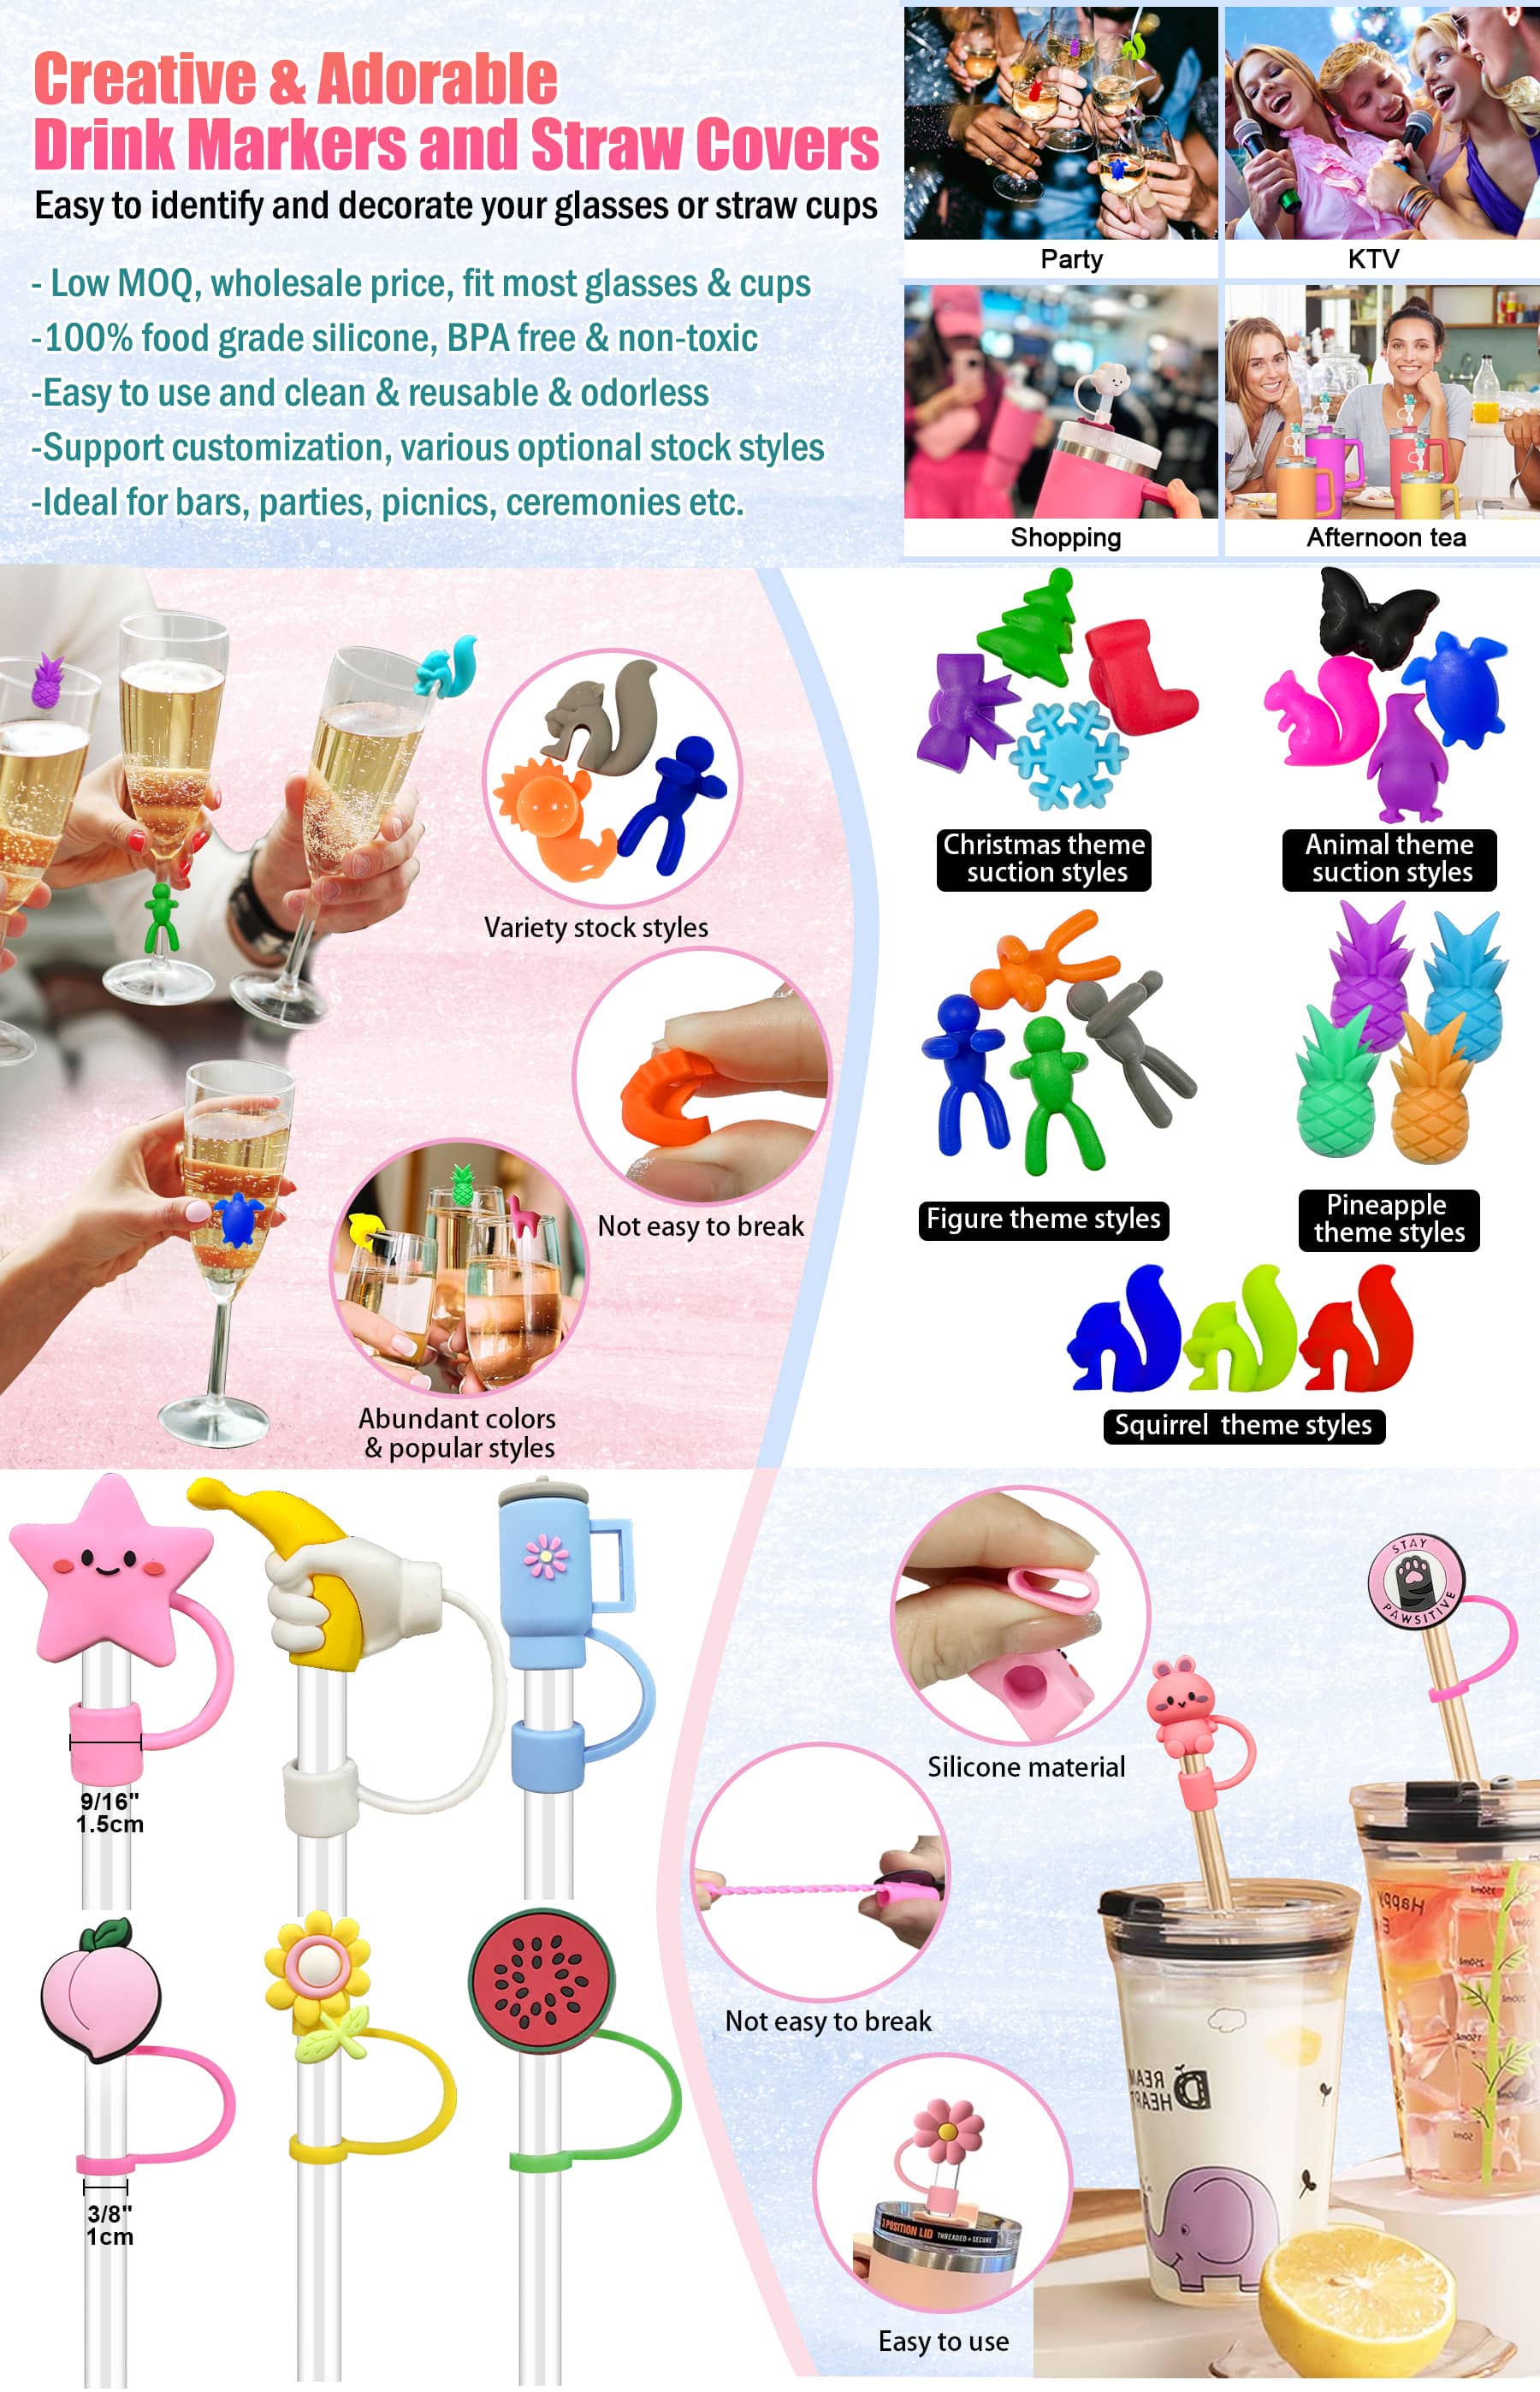 Creative & Adorable Drink Markers and straw Covers